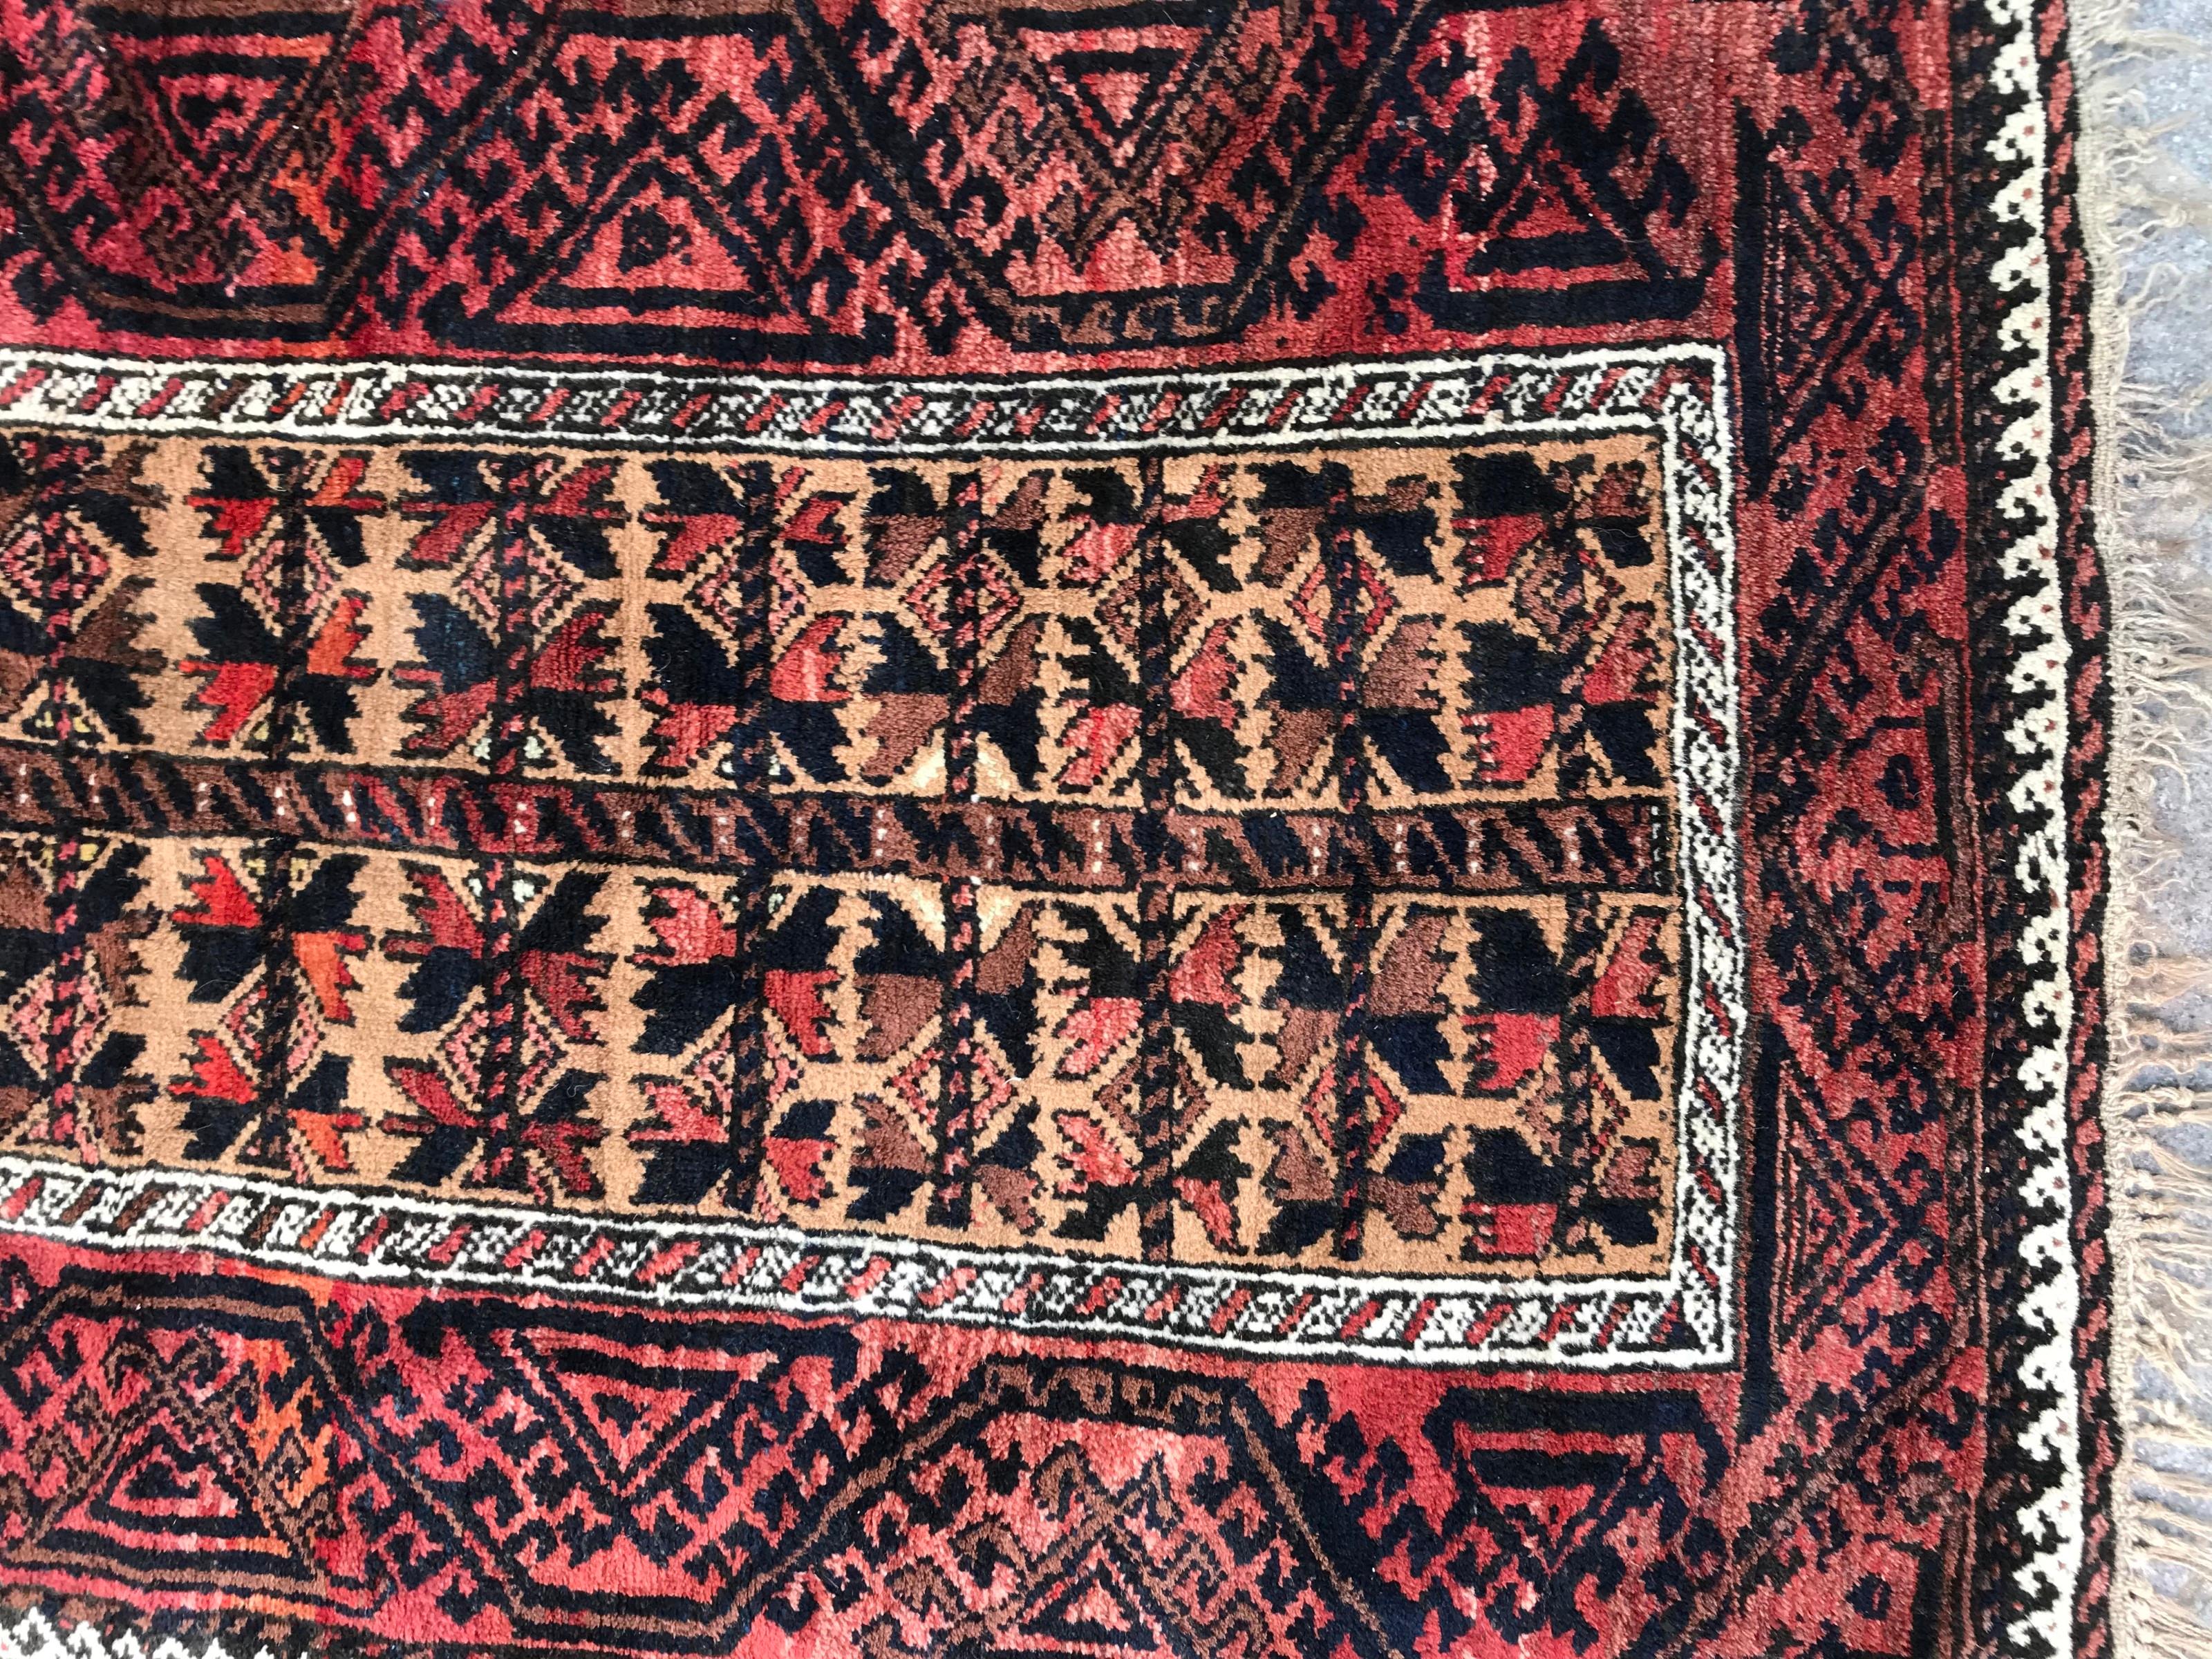 Beautiful early 20th century Turkmen Baluch rug with a tribal geometrical design and natural colors, with red, brown and yellow colors with orange, red, brown and black, entirely hand knotted with wool on wool foundation. Size: 2ft 11.44 inch x 5ft